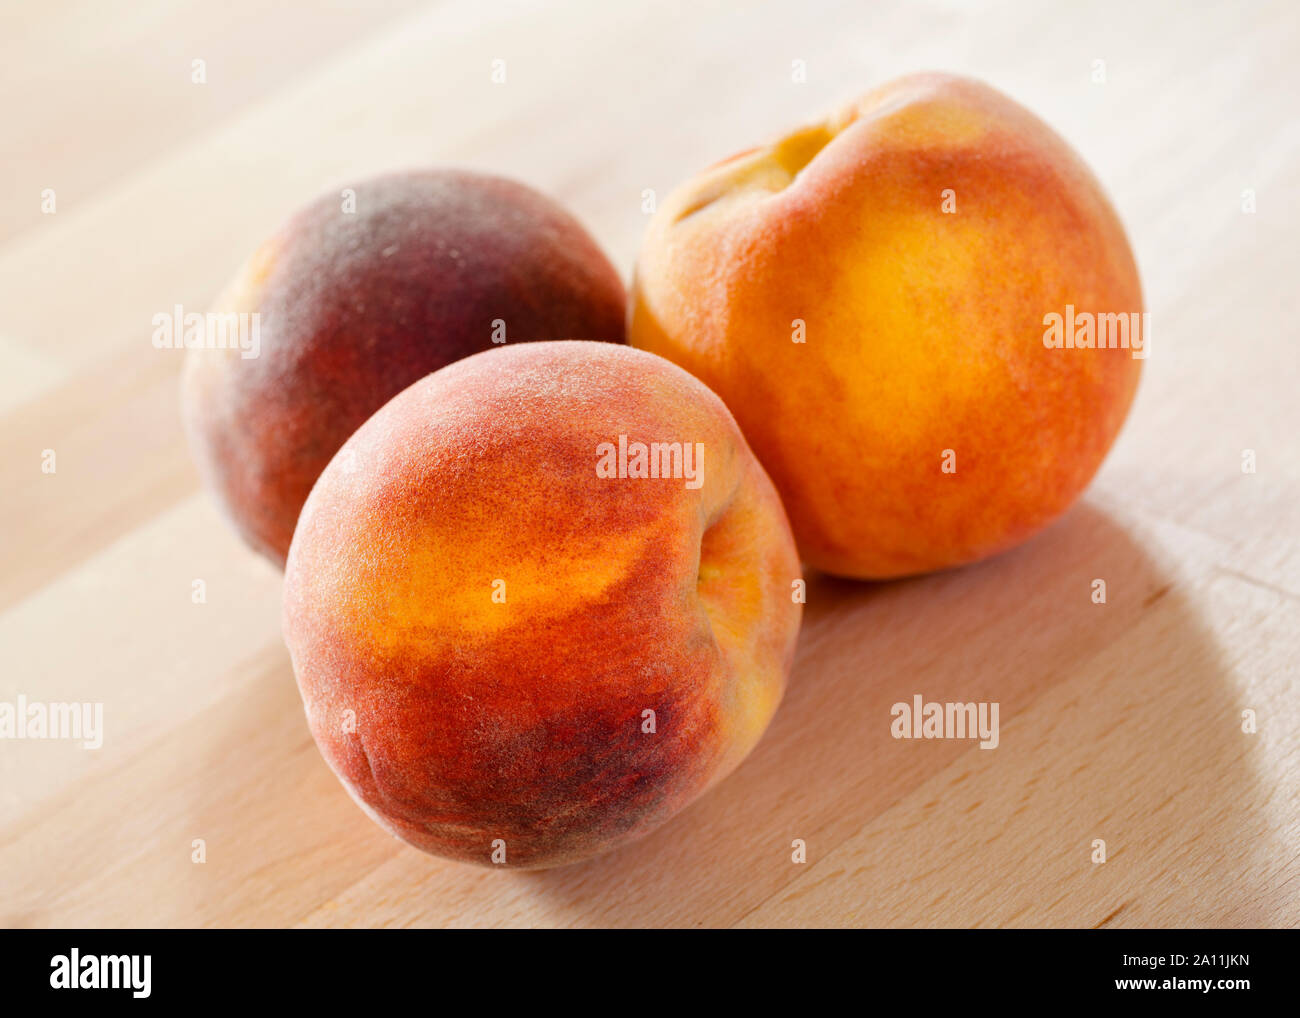 Three peaches on a wooden surface Stock Photo